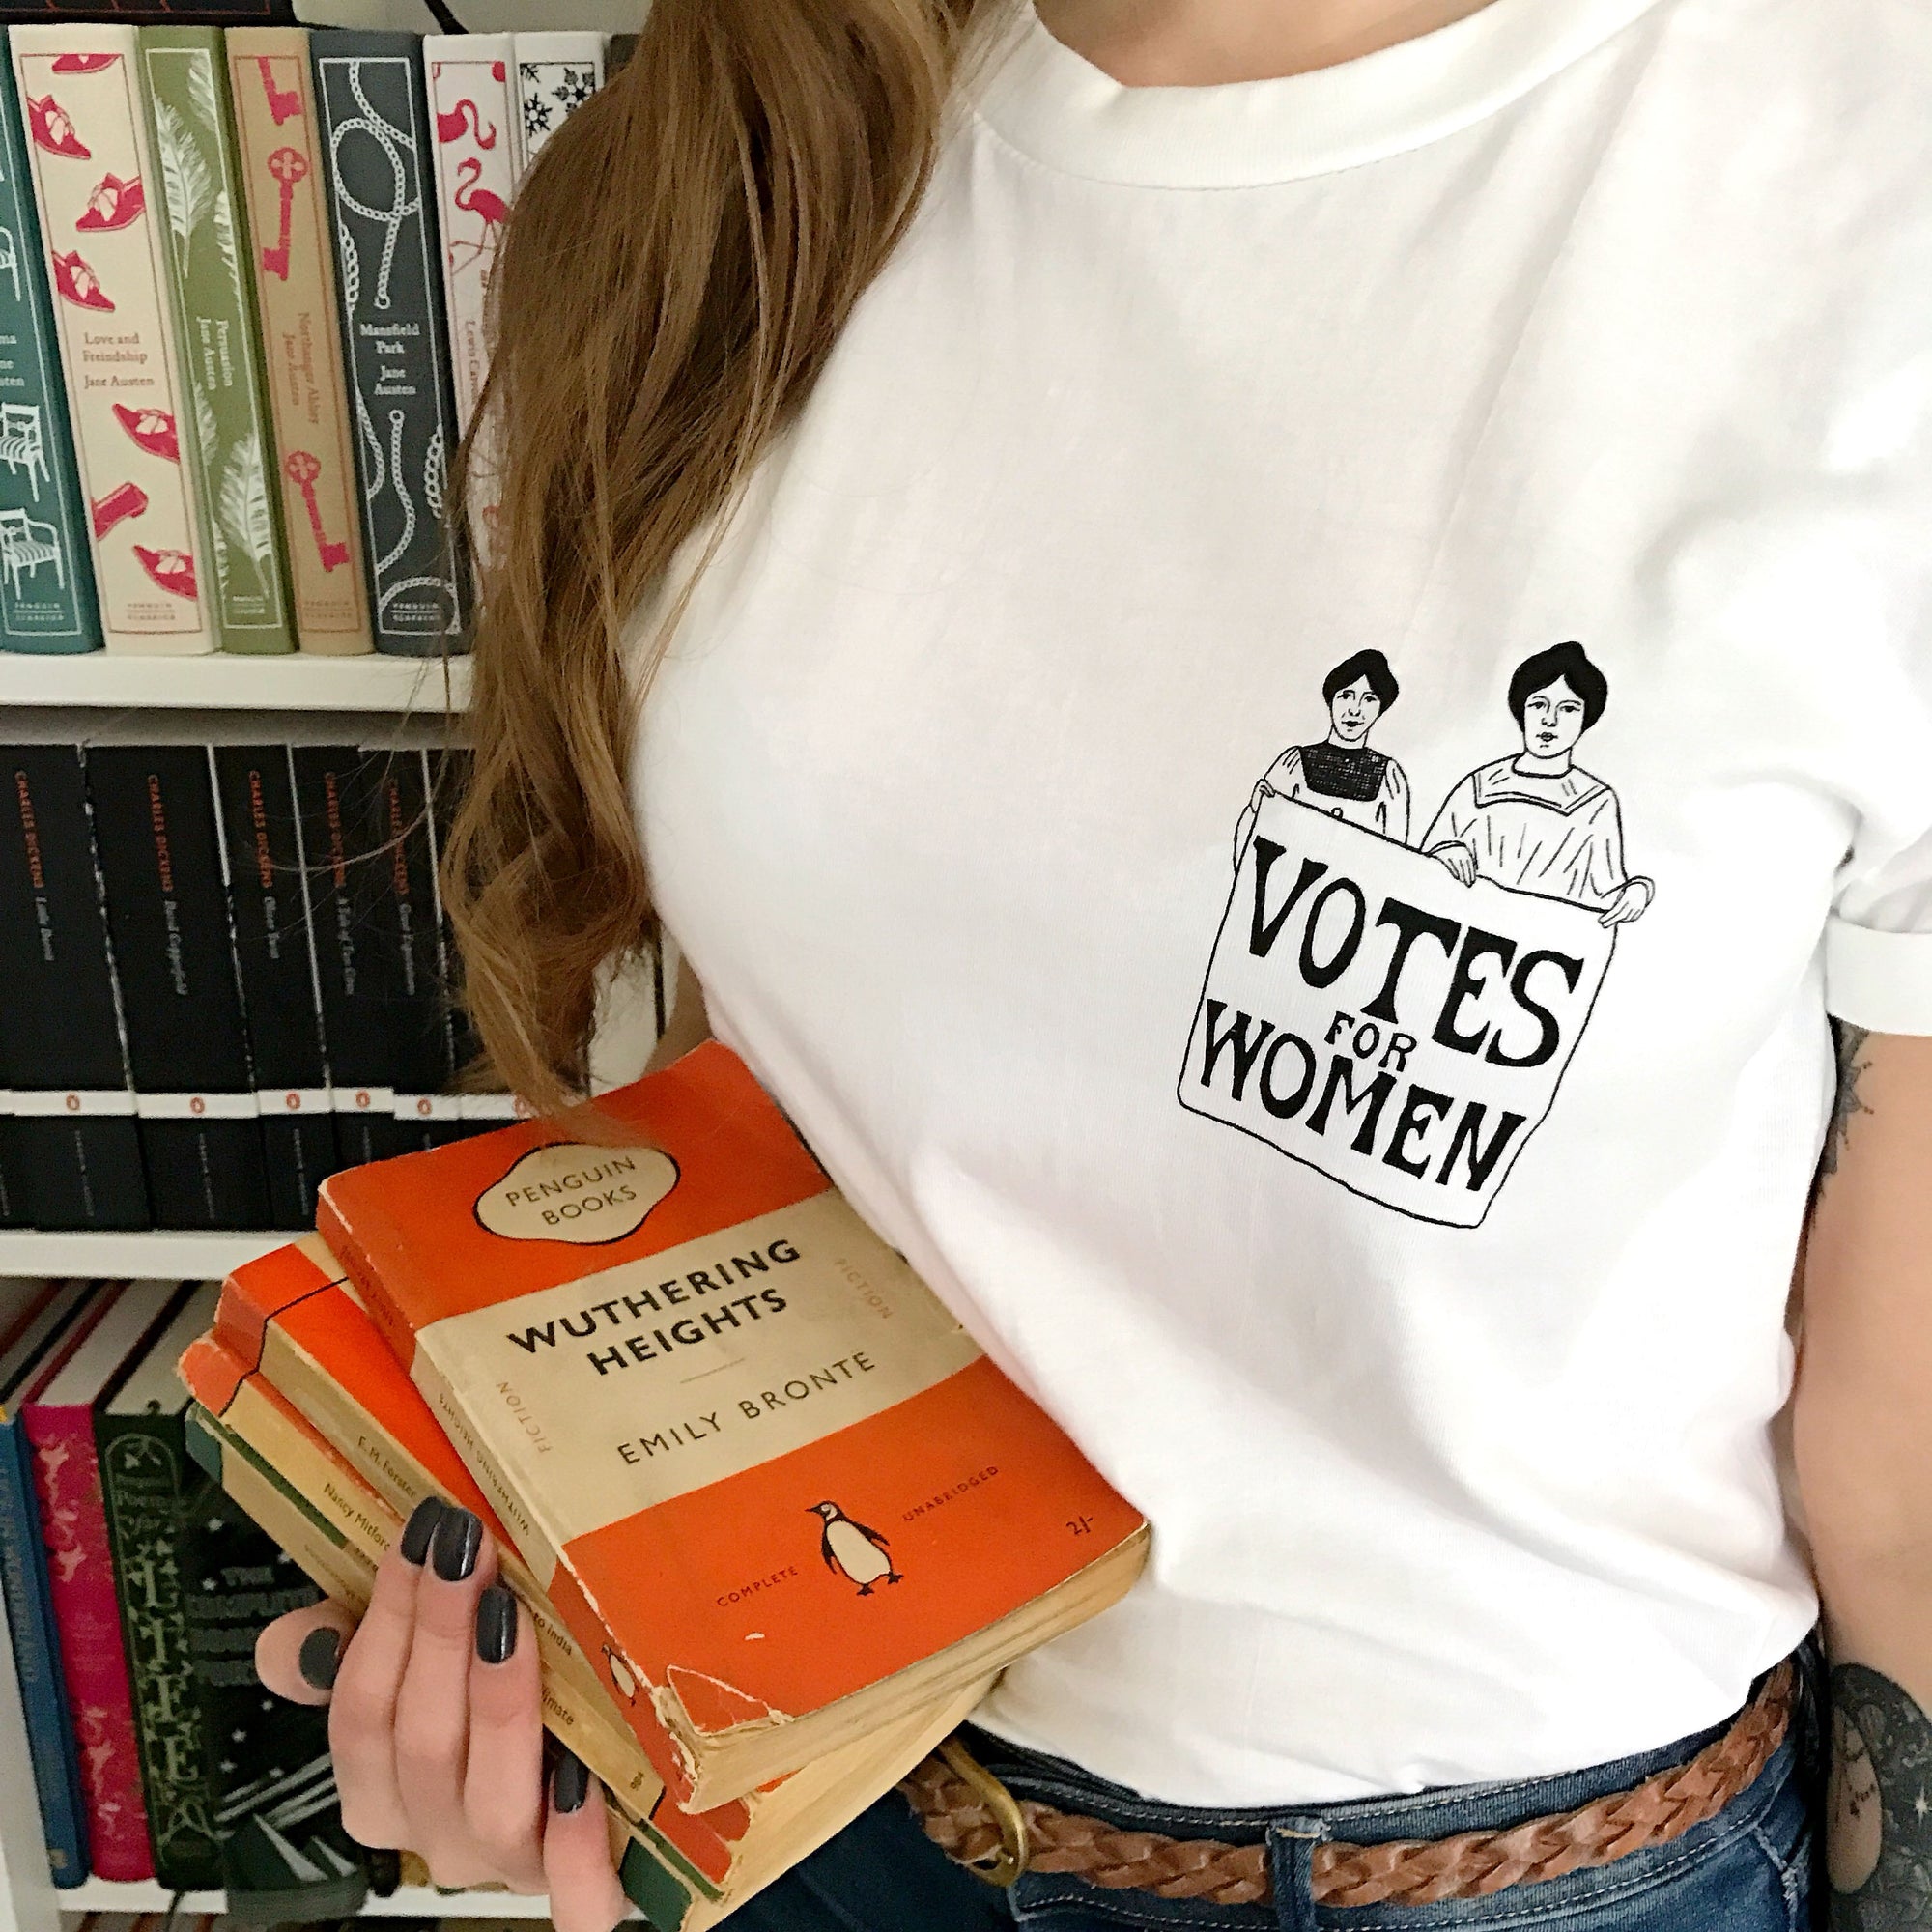 Feminist Collection